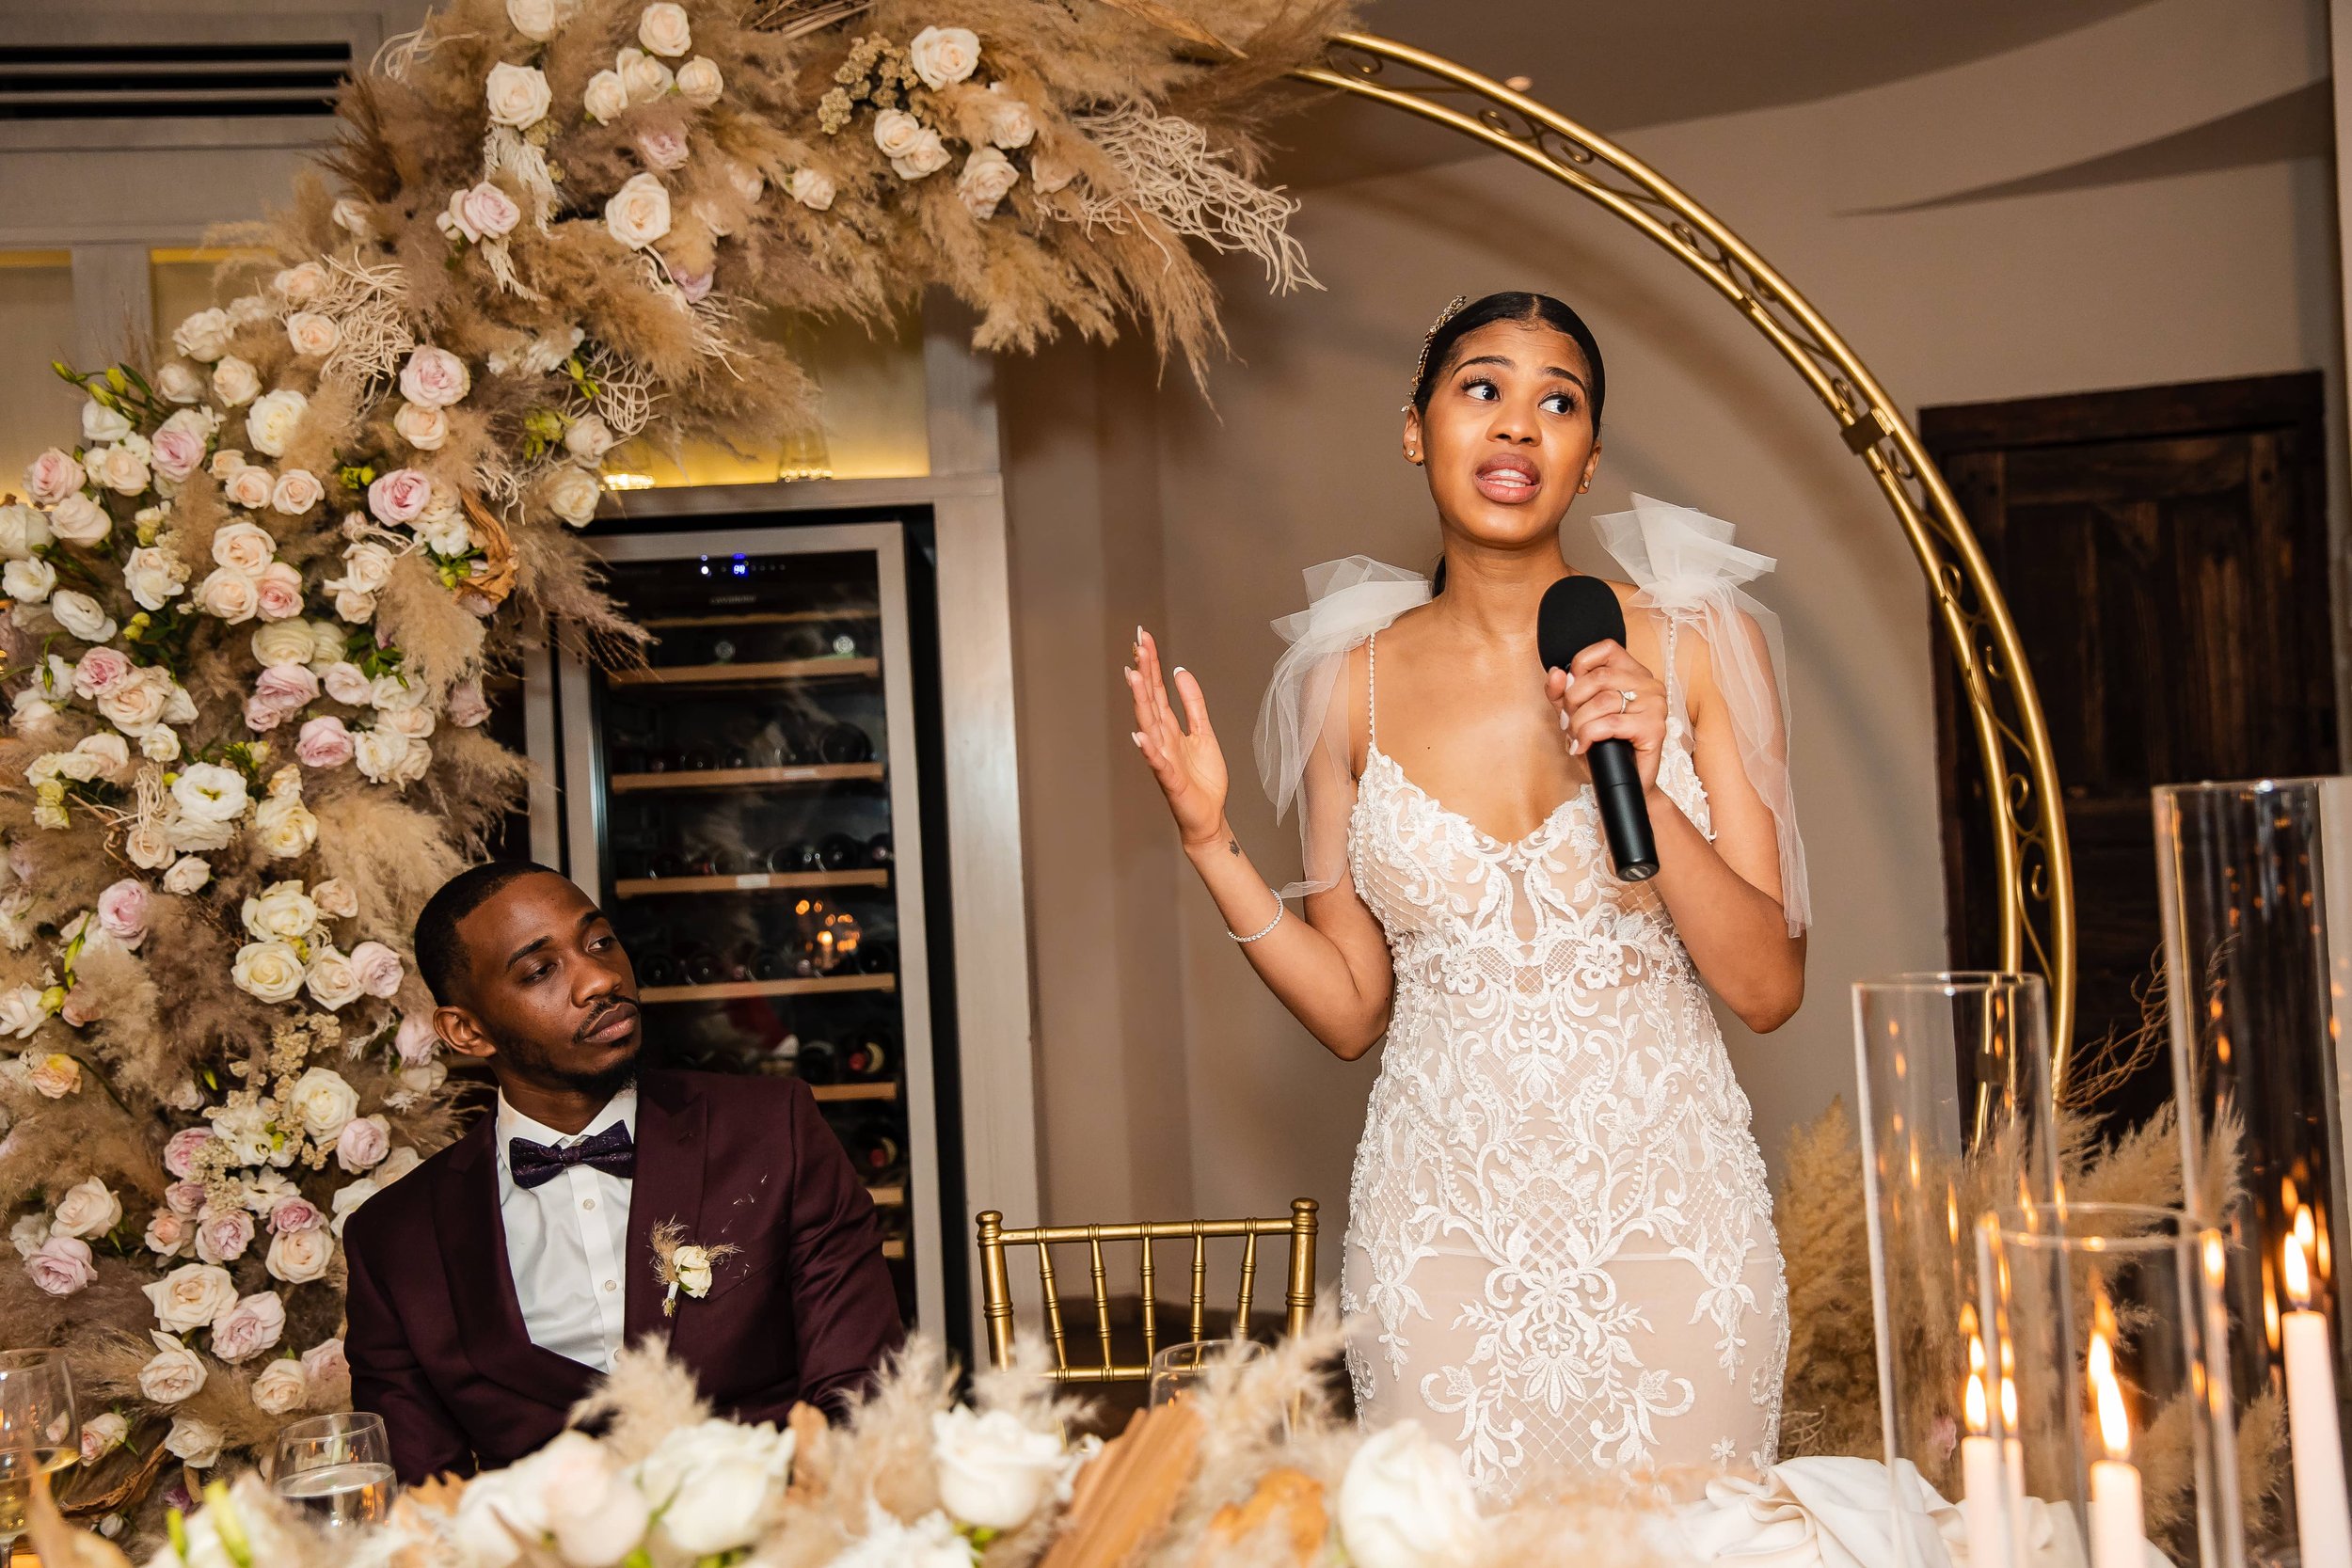  A bride in a white gown speaks into a microphone at a wedding reception, gesturing with her hands, as the groom looks on seated next to her under a floral arch. 